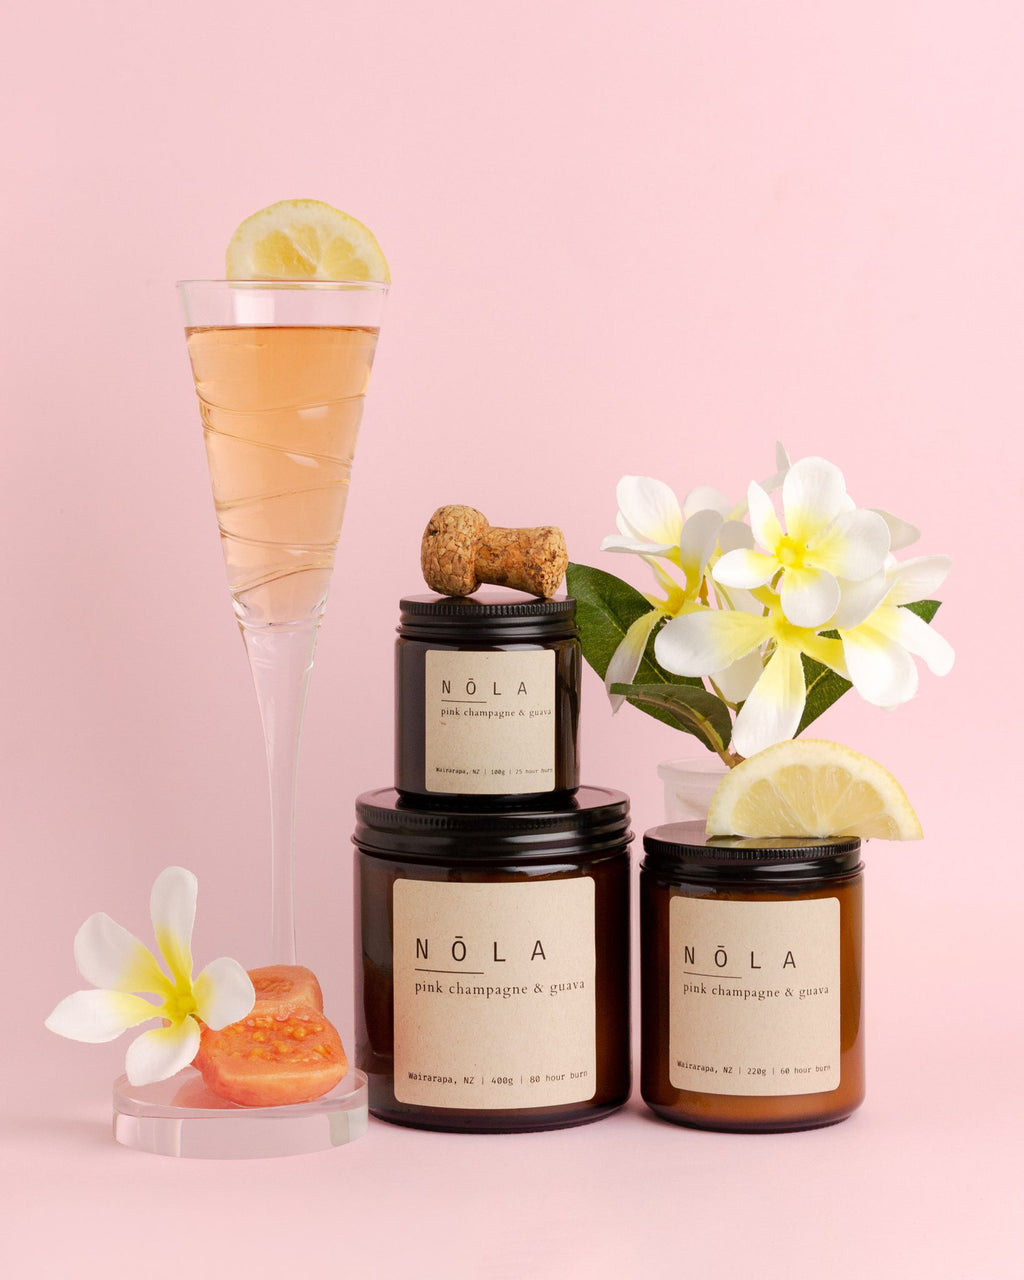 Nola Candle - Pink Champagne & Guava